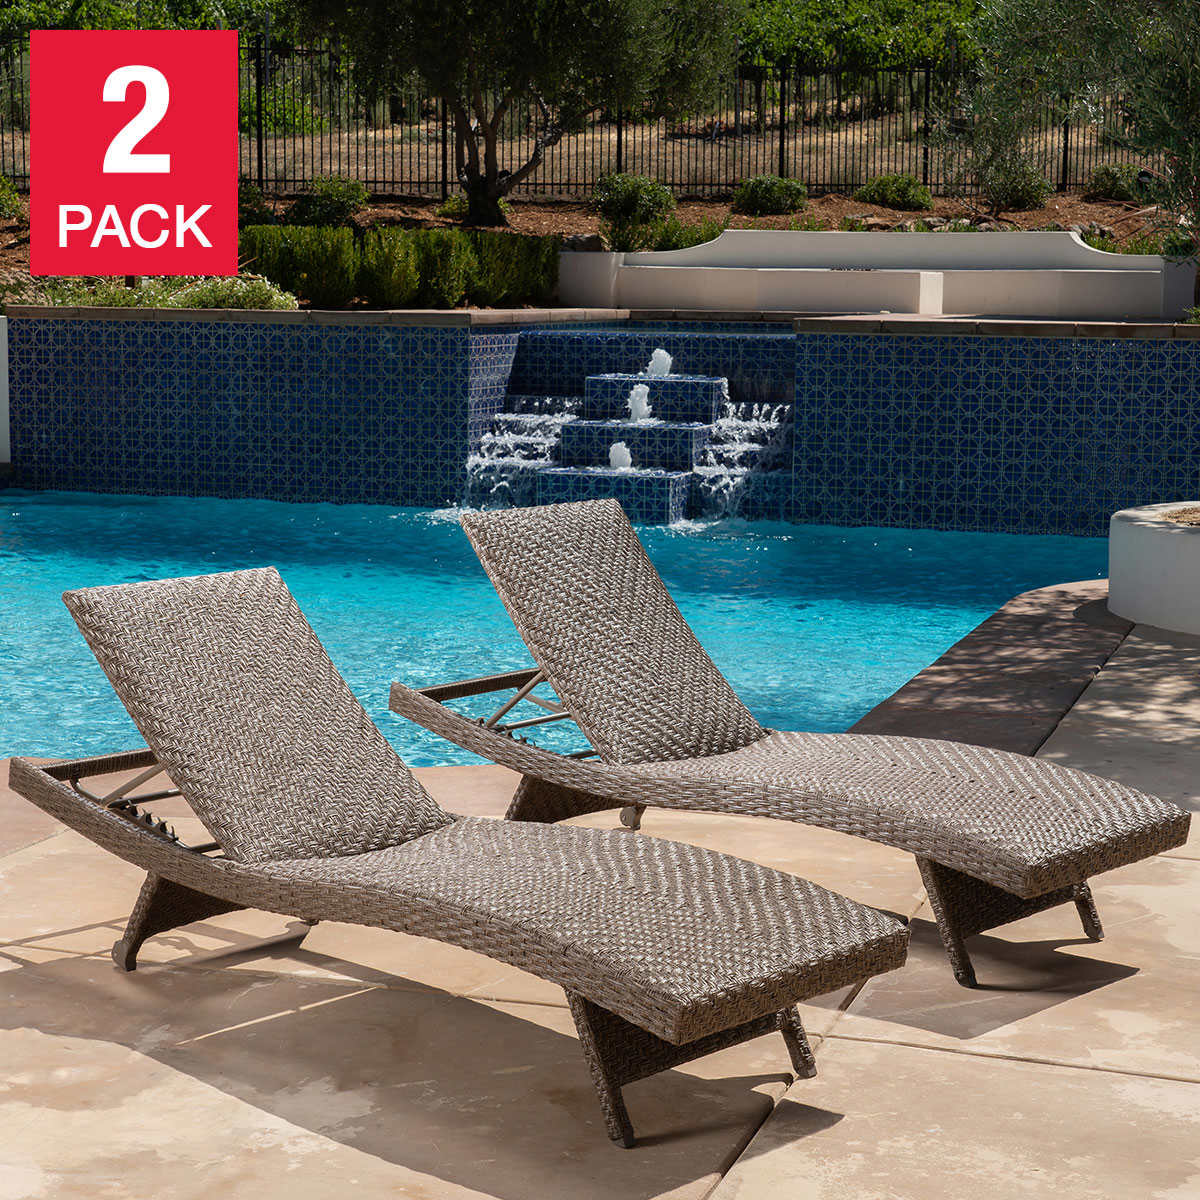 2 Pack Patio Loungers Costco, Outdoor Patio Lounge Chairs Canada